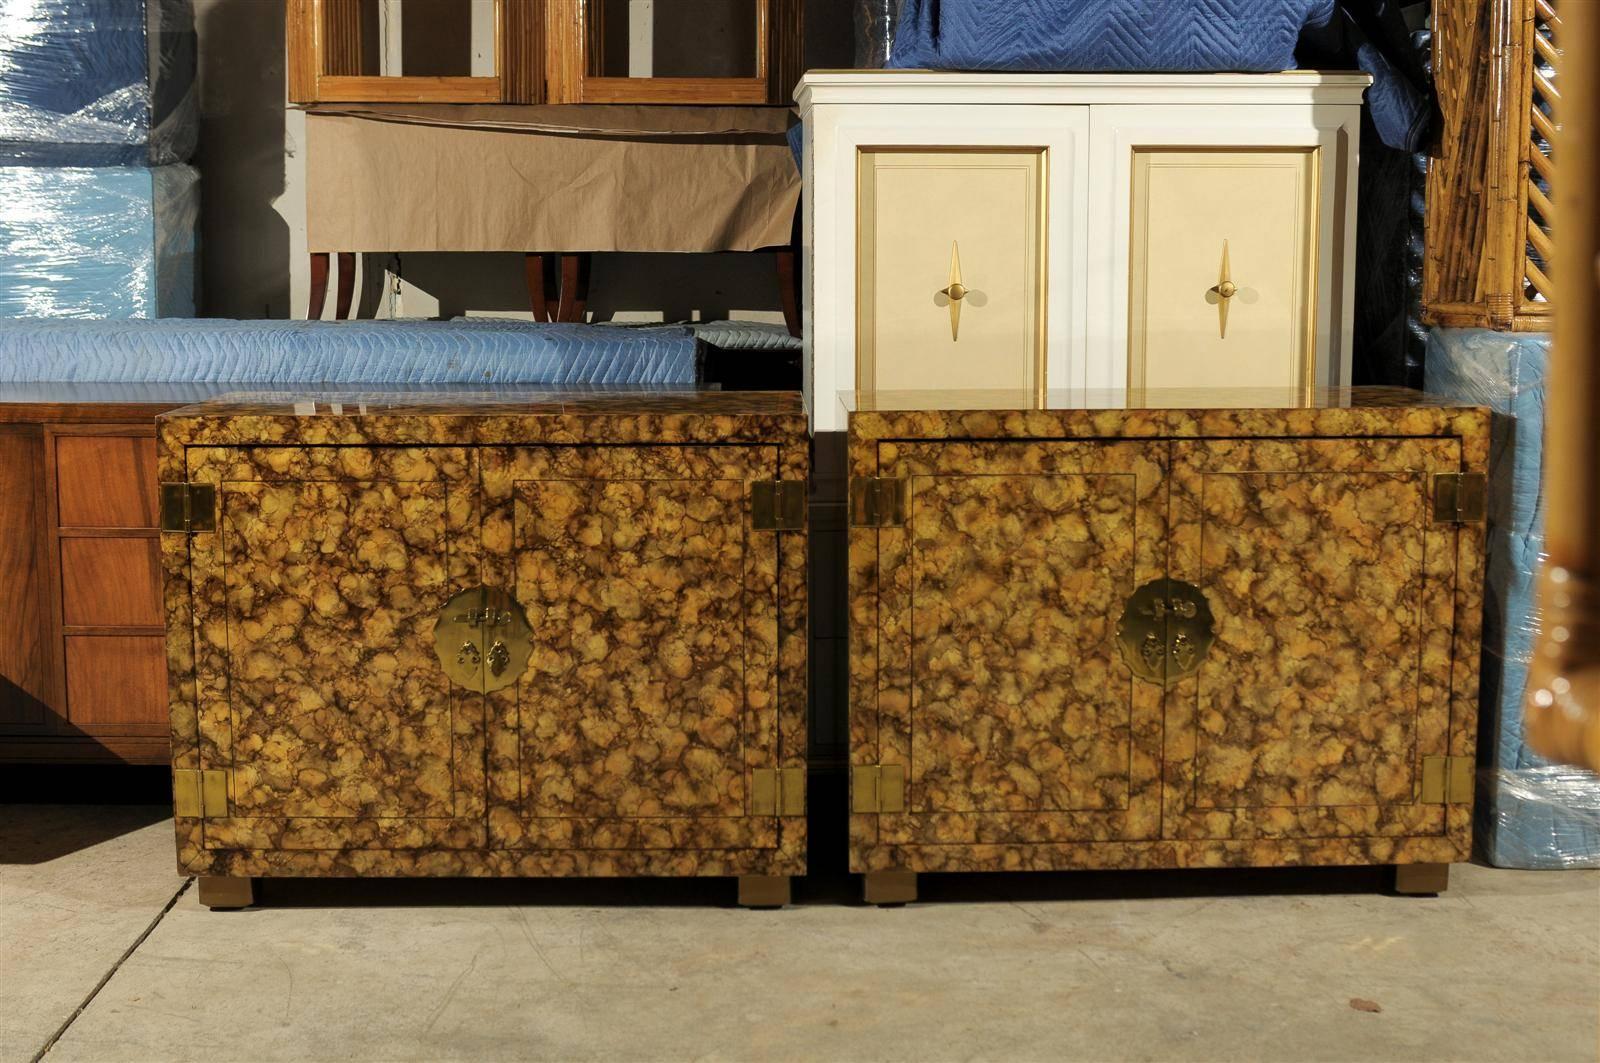 A gorgeous pair of vintage cabinets by Henredon, circa 1975. The unusual finish is created by an oil drop lacquer technique which portrays the look of tortoise shell. Exceptional detail and craftsmanship. Excellent restored condition. The cabinets